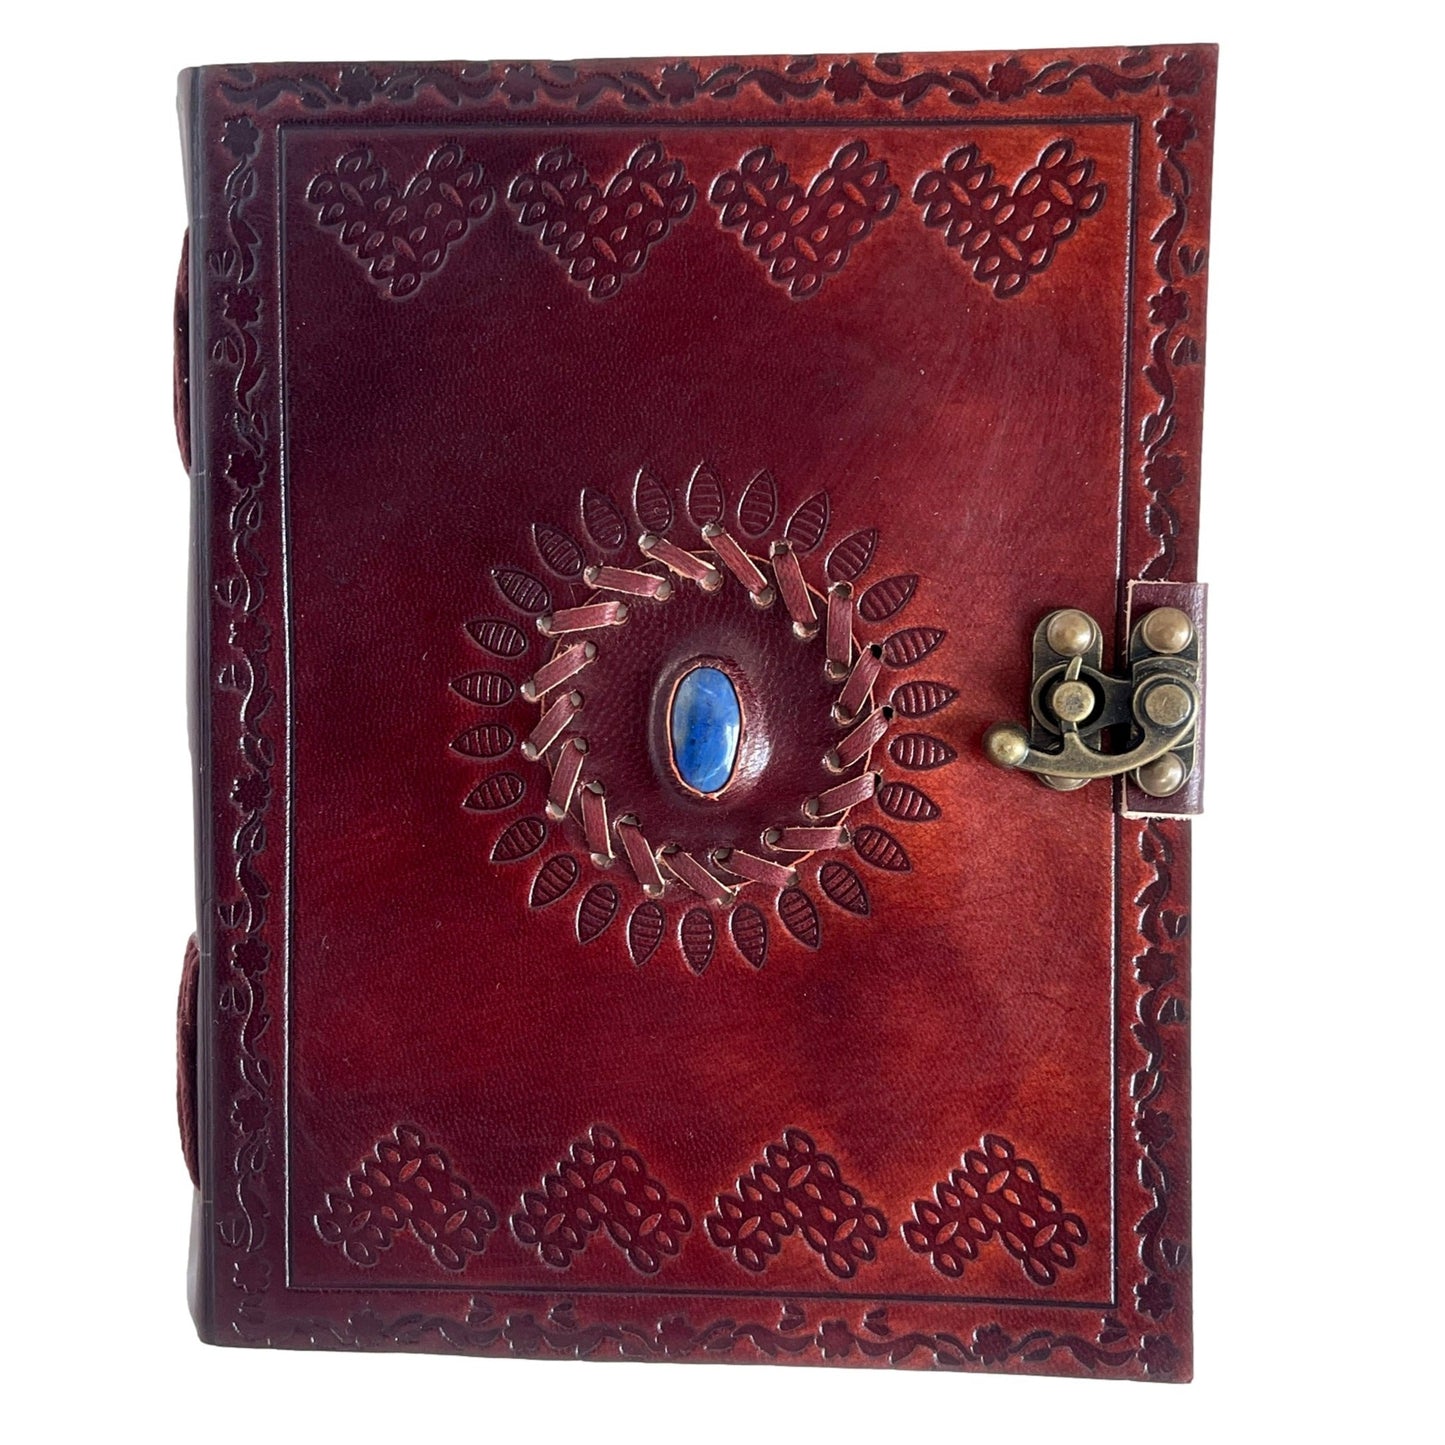 100 % Leather Journal Embossed with Lapis Lazuli Crystal